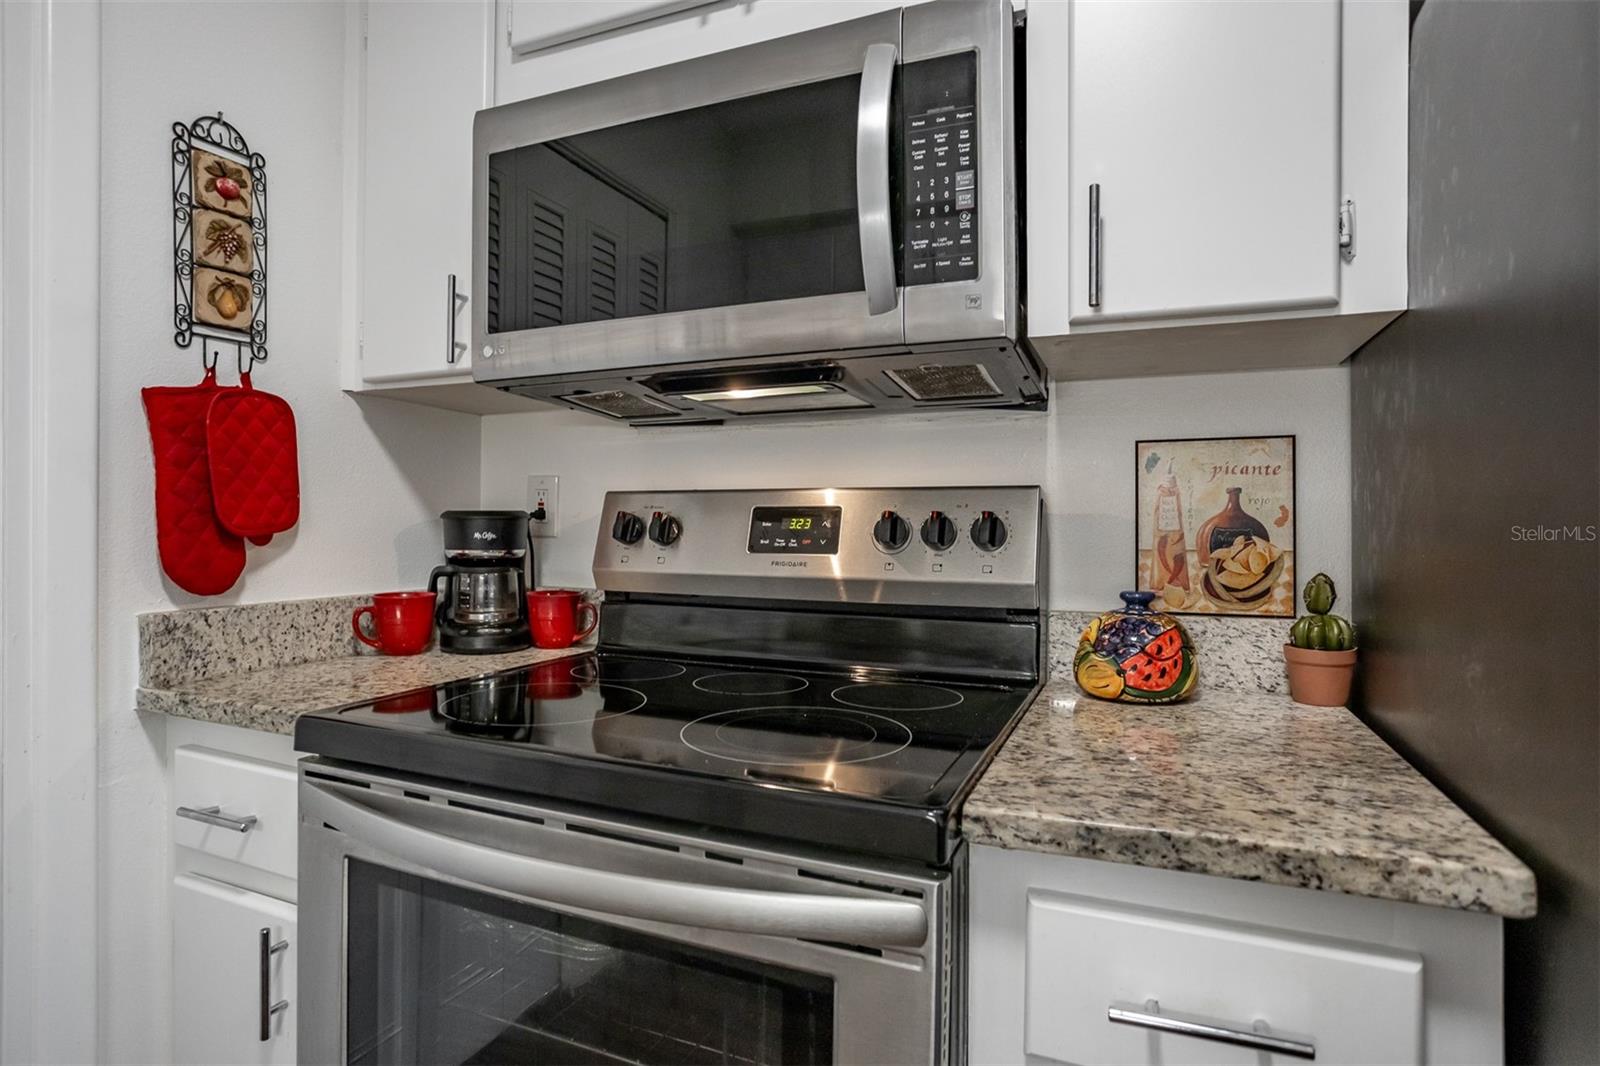 Enjoy updated stainless steel appliances